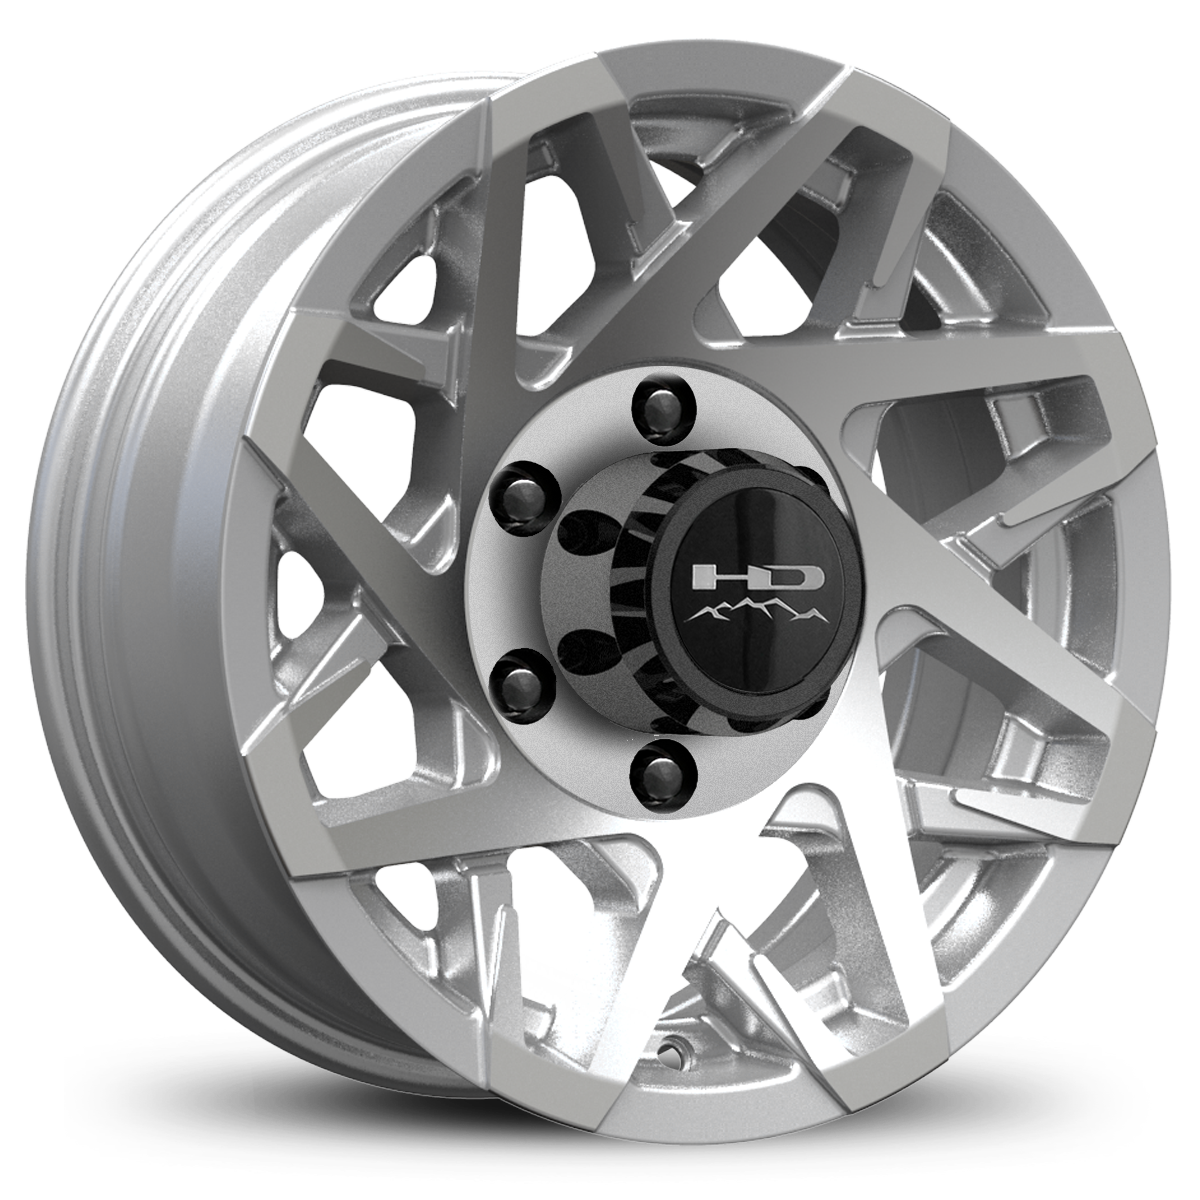 HD Off-Road Canyon Custom Trailer Wheel Rims in 15x6.0  15x6 Gloss Silver Machined Face with Center Cap & Logo fits 6x5.50 / 6x139.7 Axle Boat, Car, RV, Travel, Concession, Horse, Utility, Lawn & Garden, & Landscaping.